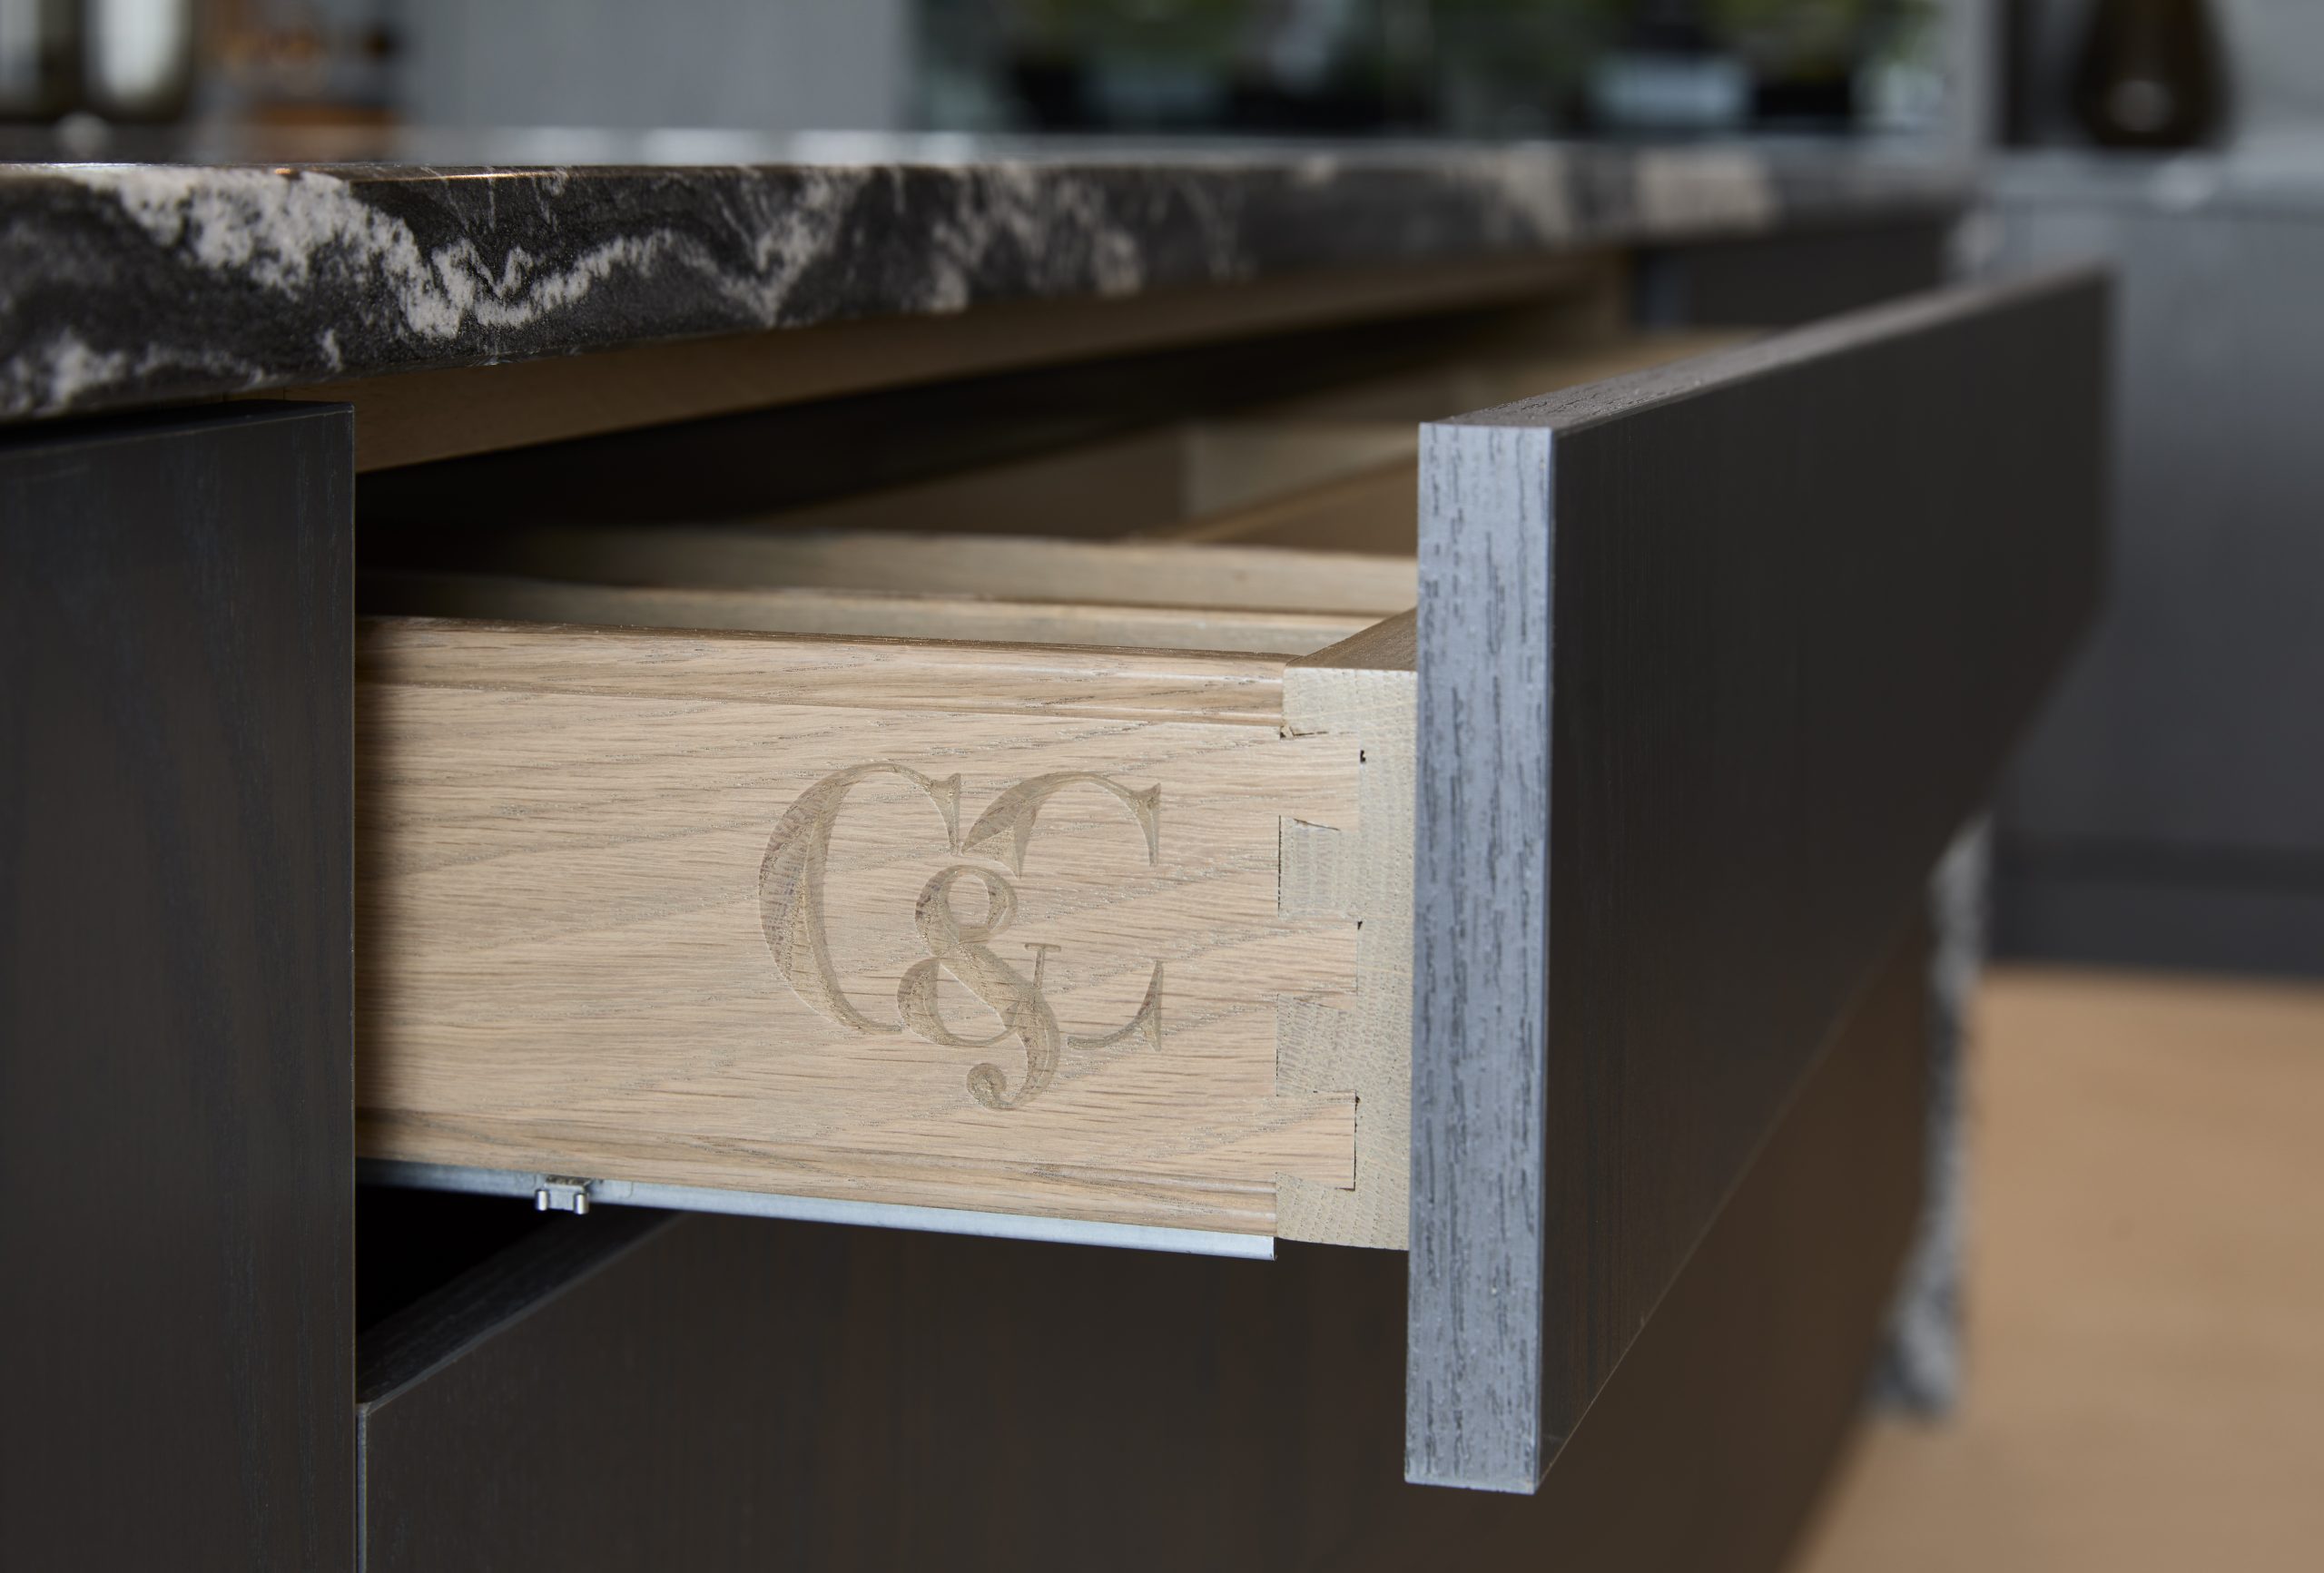 Cooks & Company’s attention to detail featuring engraved logo into hardwood drawer.